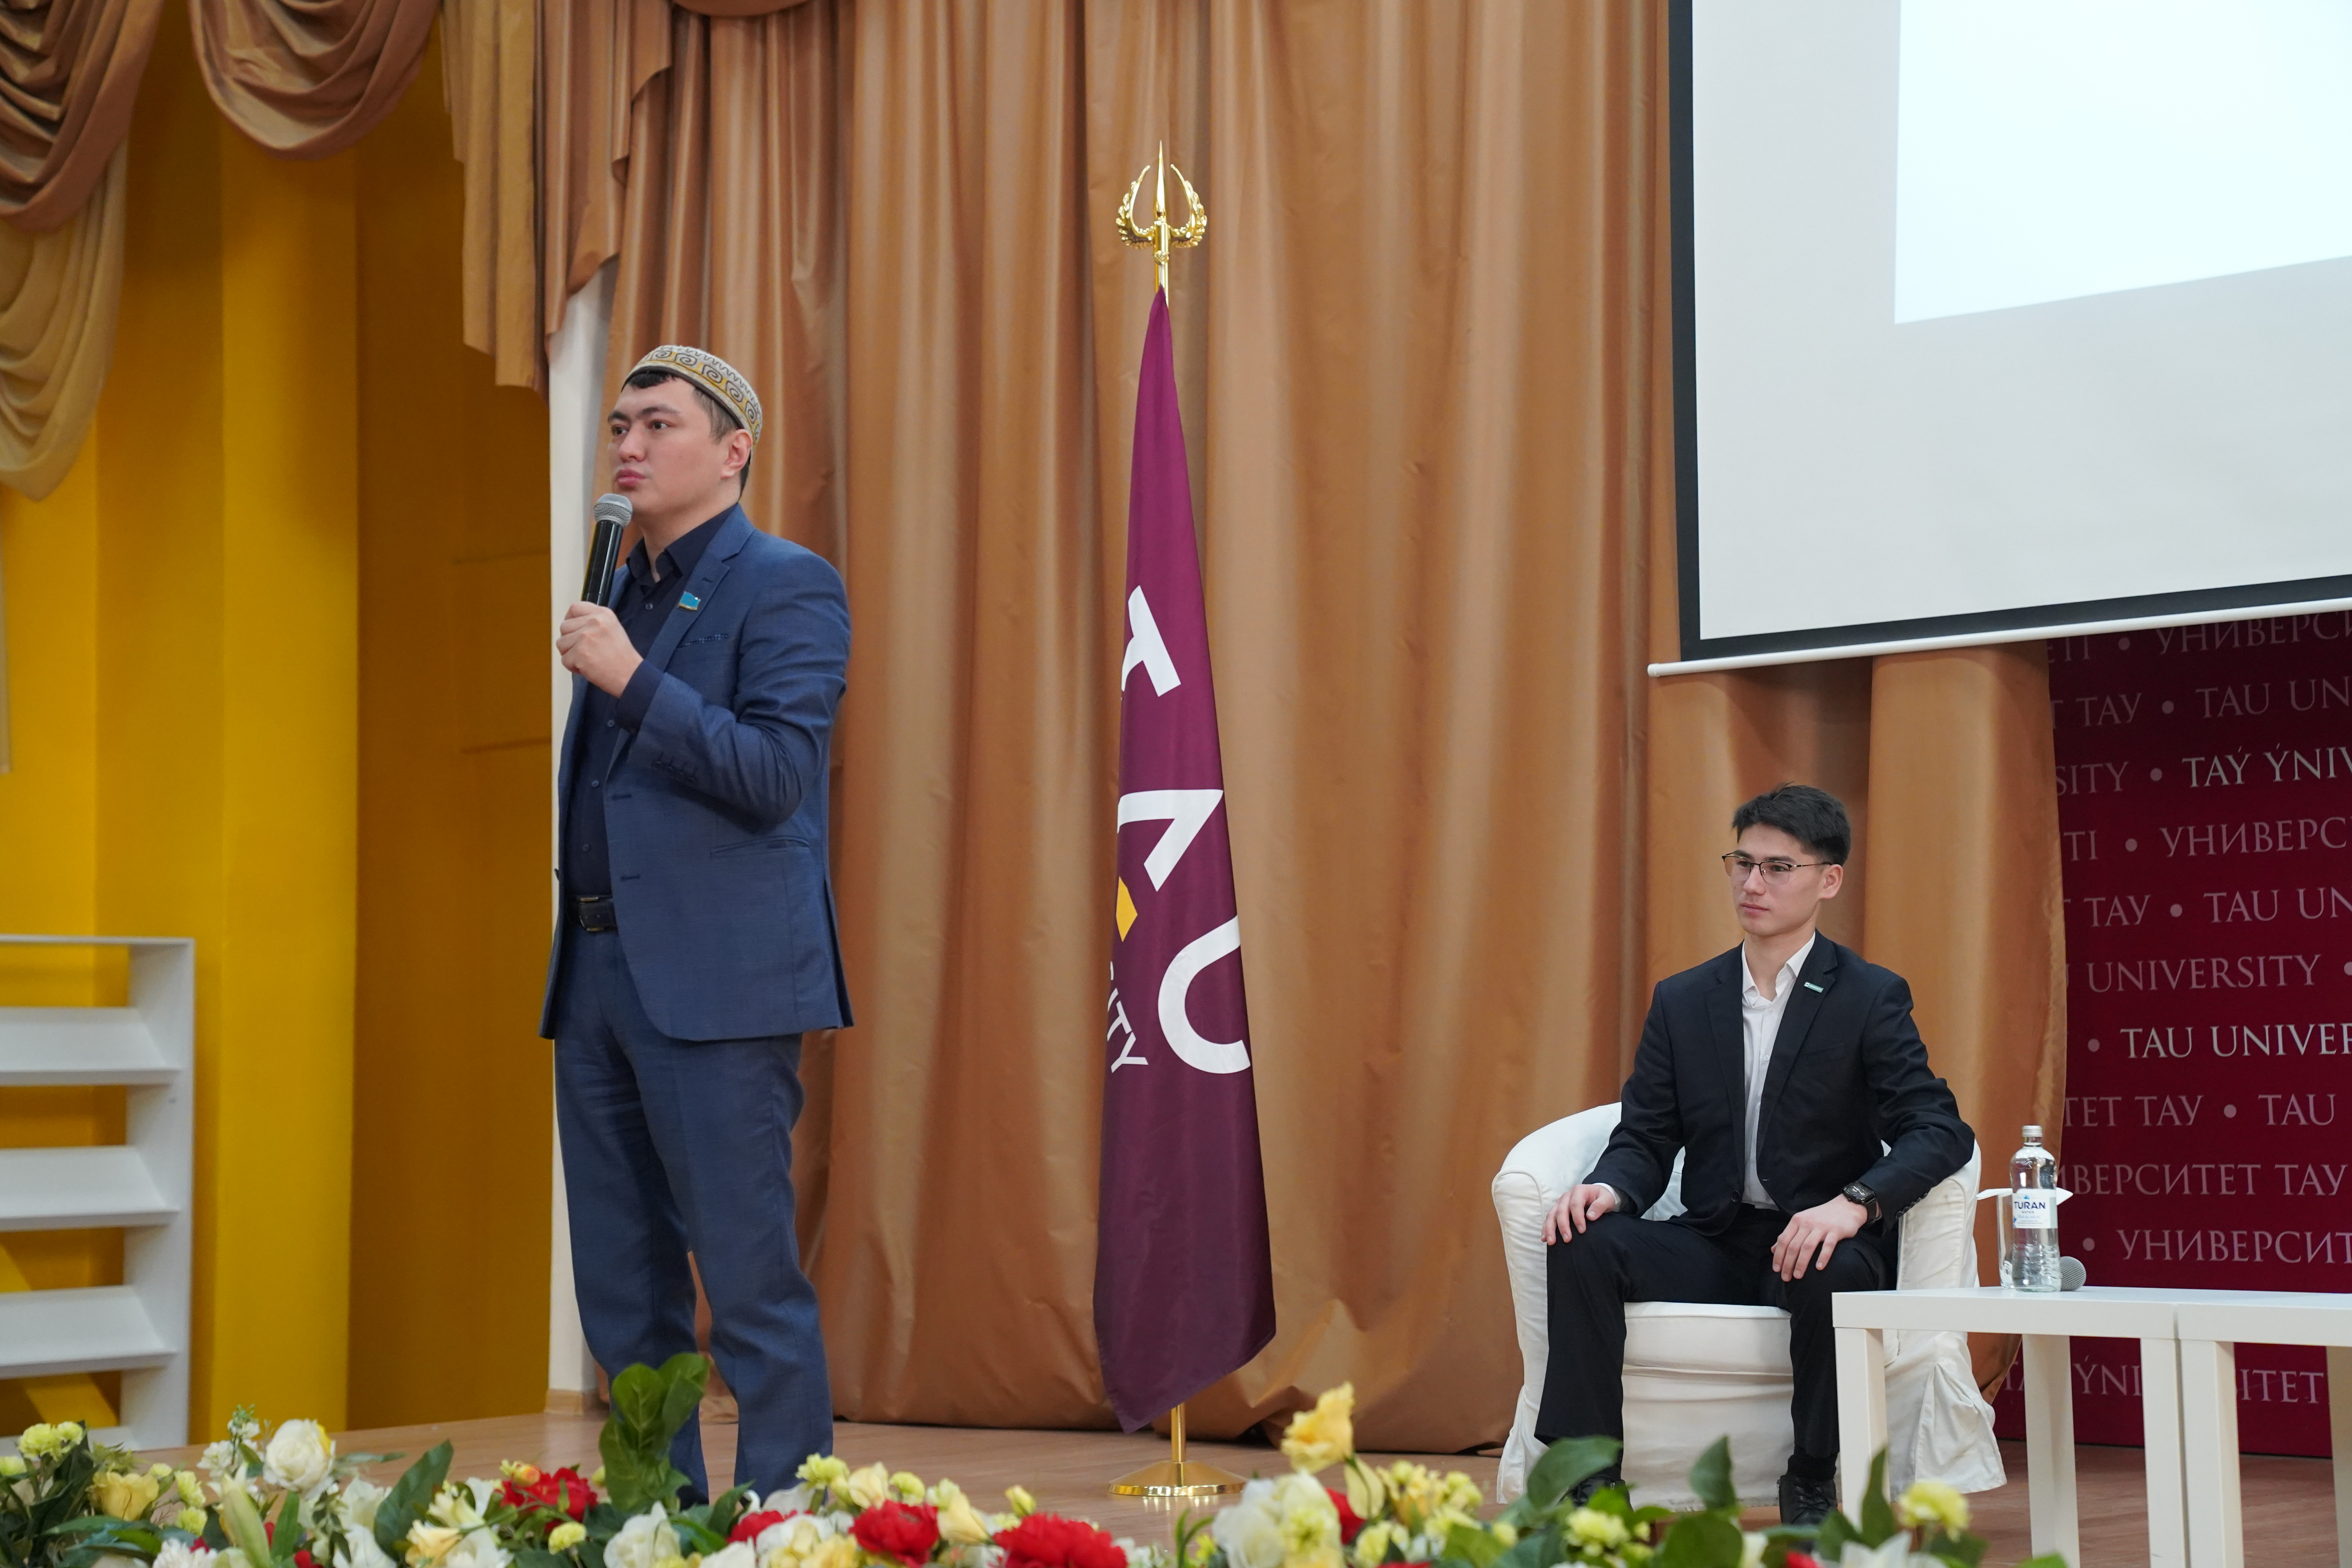 A lecture on financial literacy was conducted for the students of Turan-Astana University